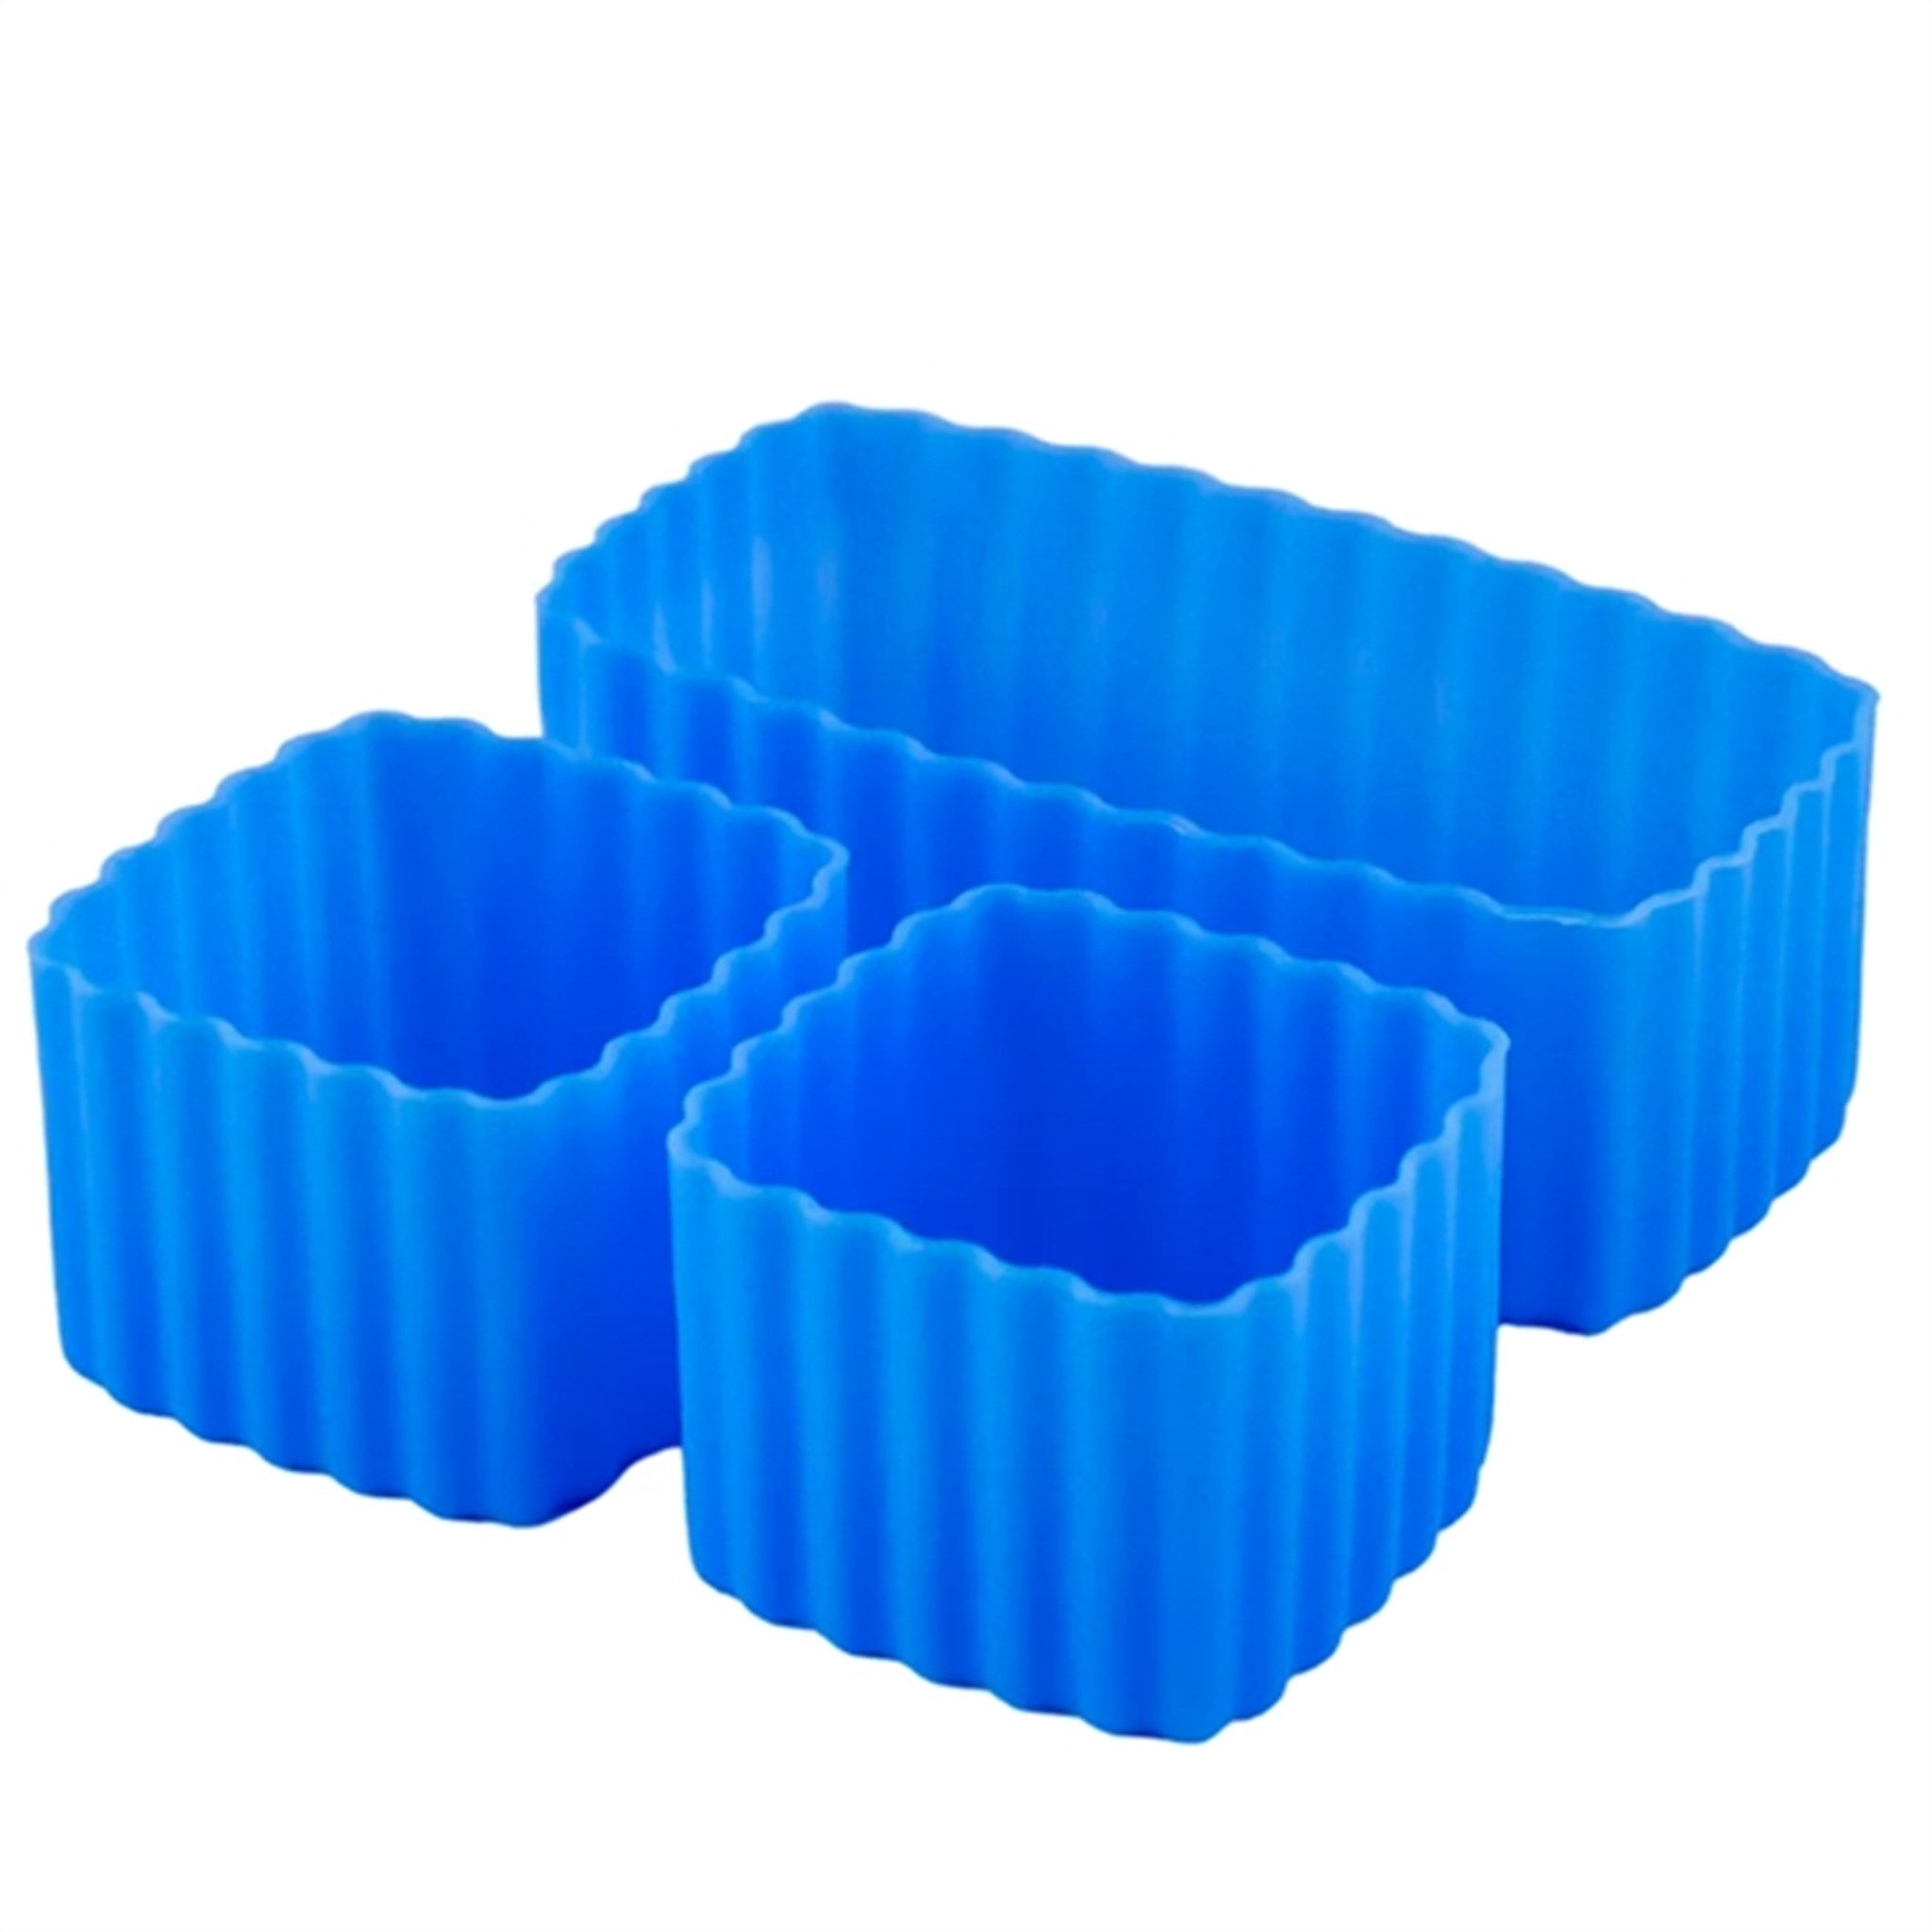 Little Lunch Box Co Bento Silicone Cups Mixed Blueberry